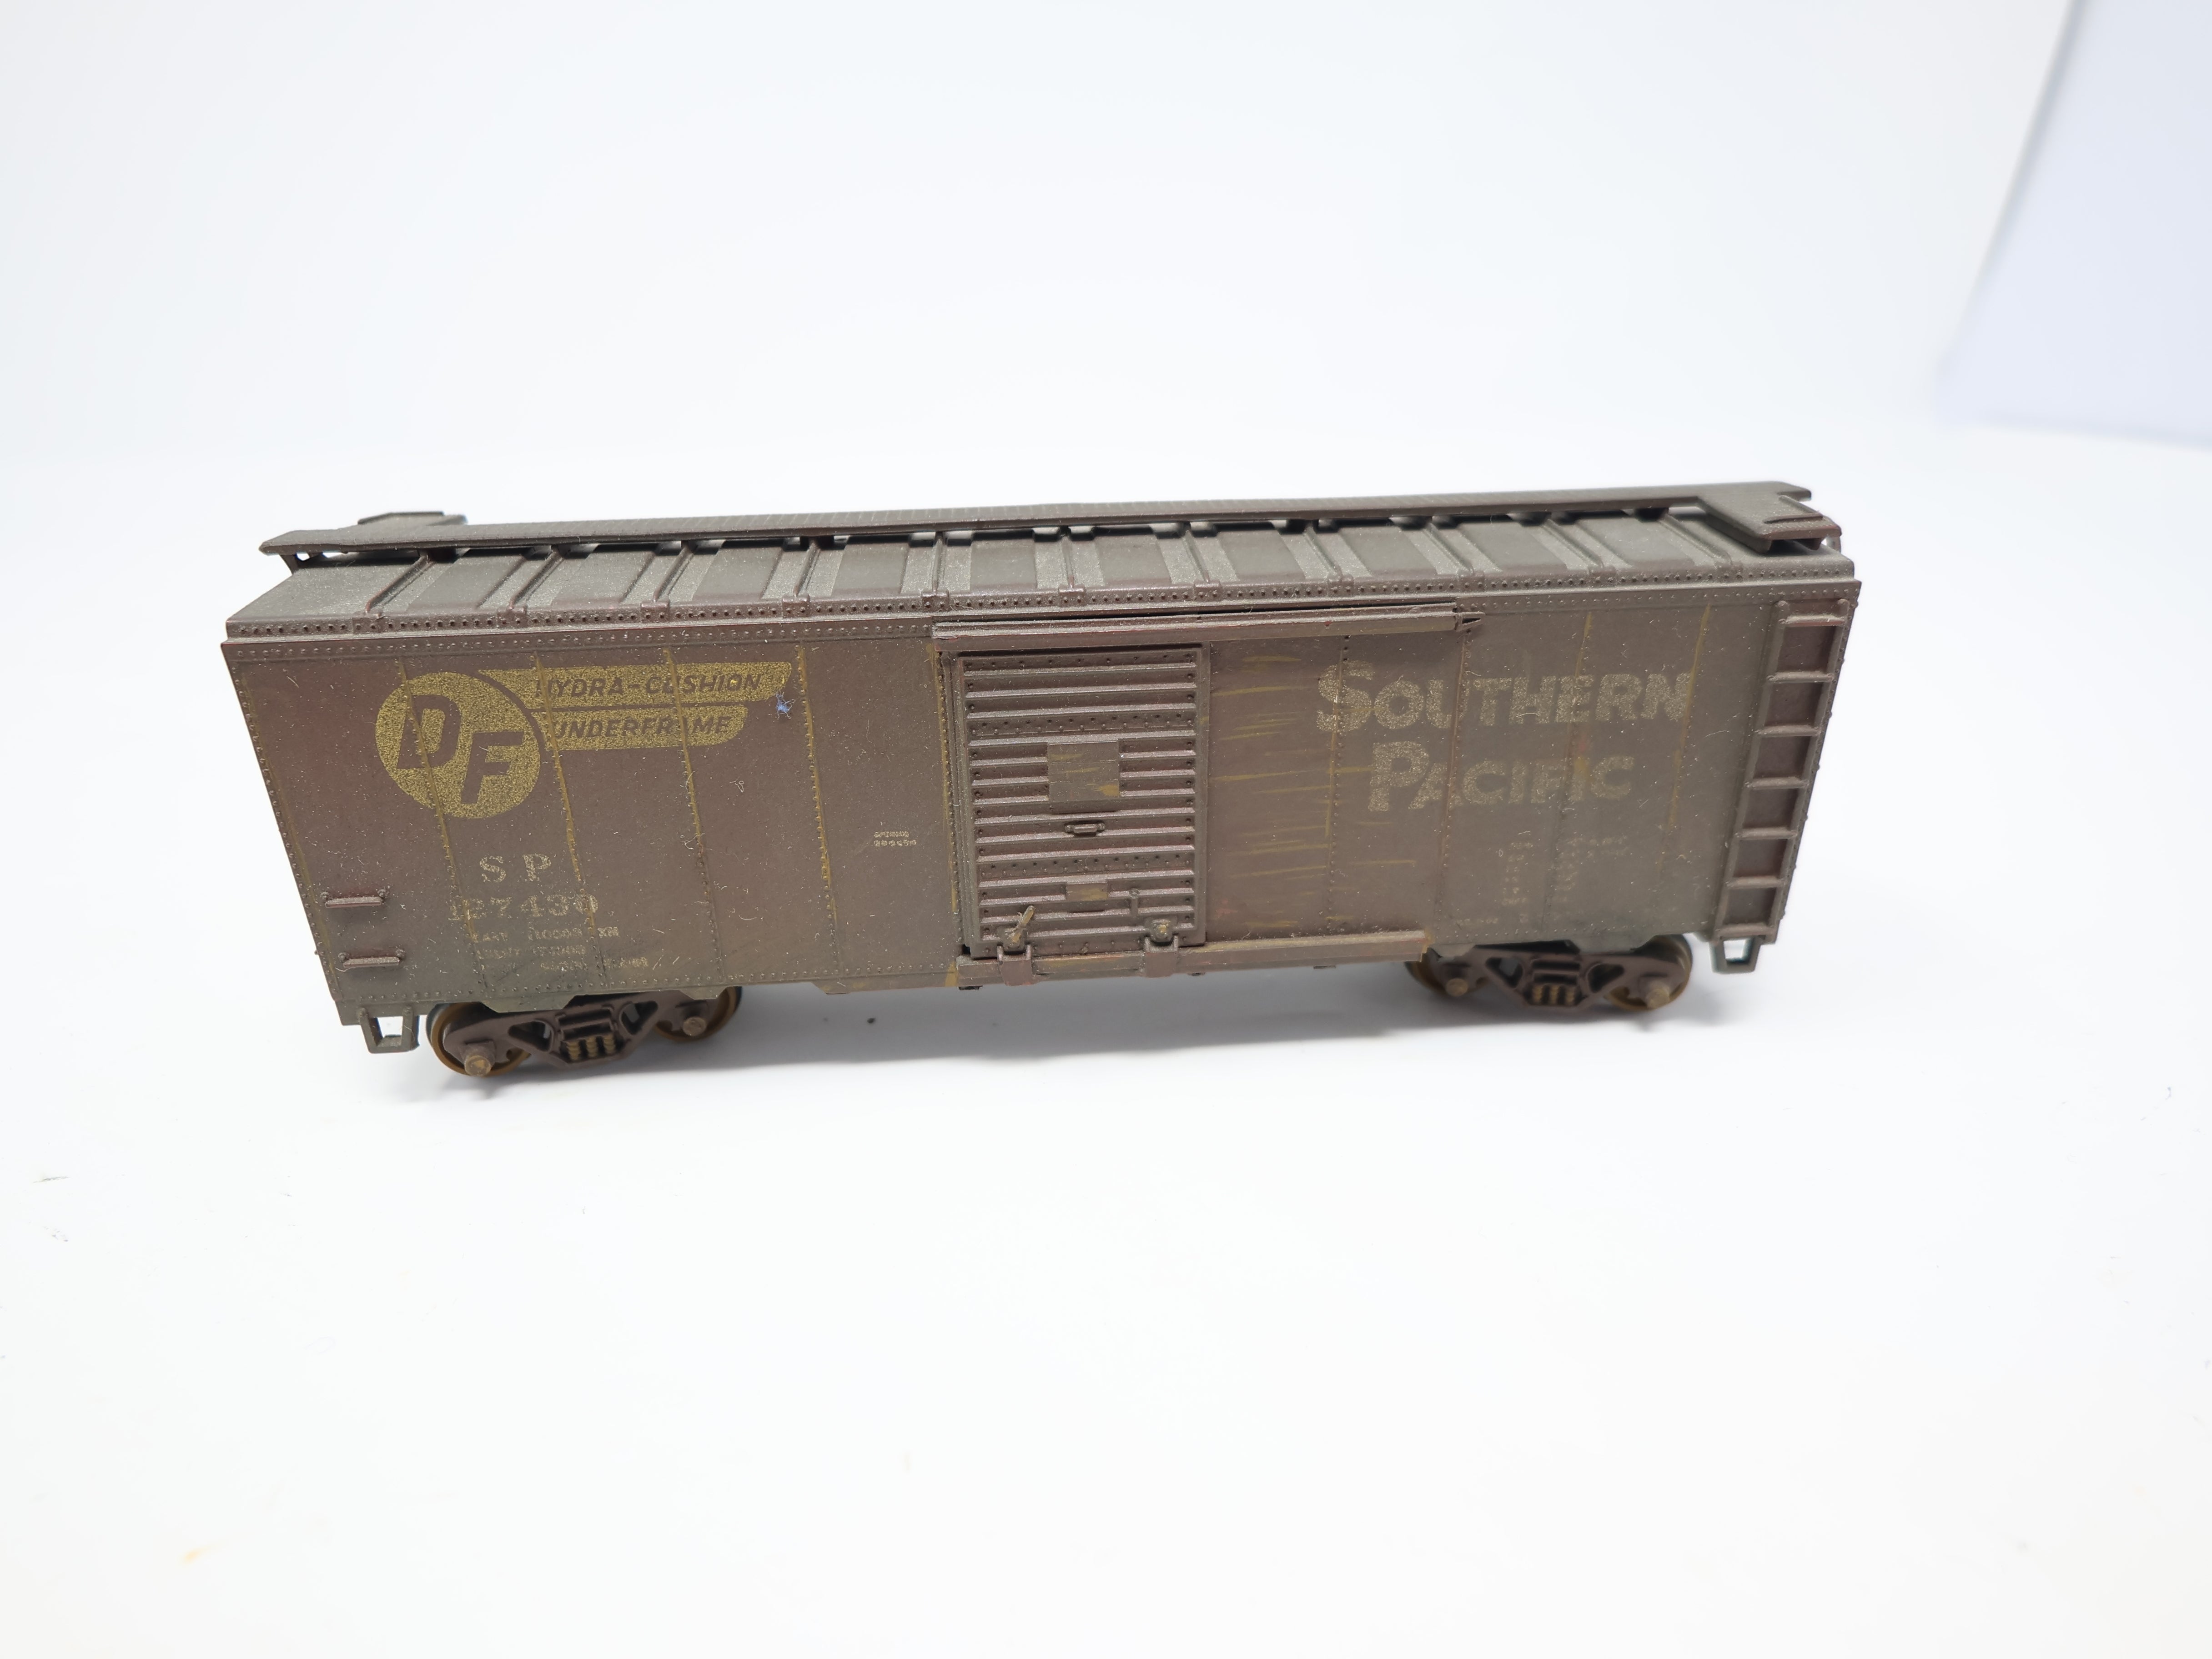 USED Athearn HO Scale, Weathered 40' Box Car, Southern Pacific SP #127430